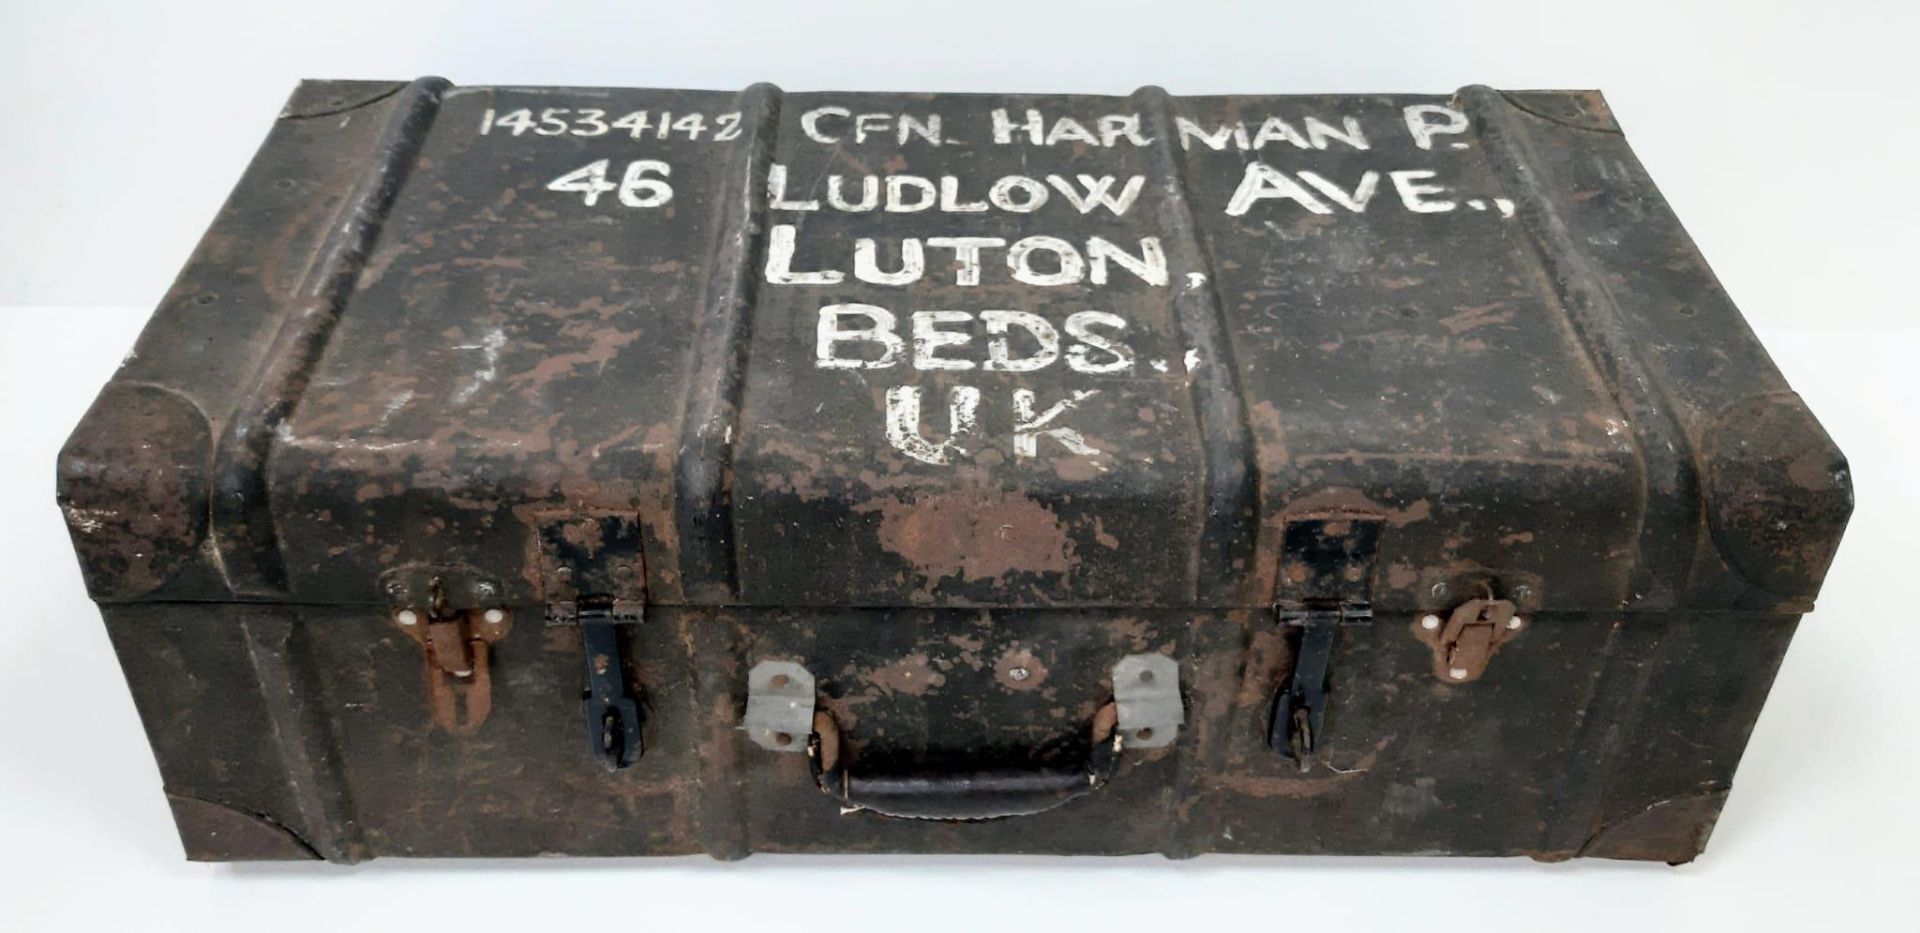 A 1920-30's British Serviceman's personal metal suitcase. This unique suitcase belonged to